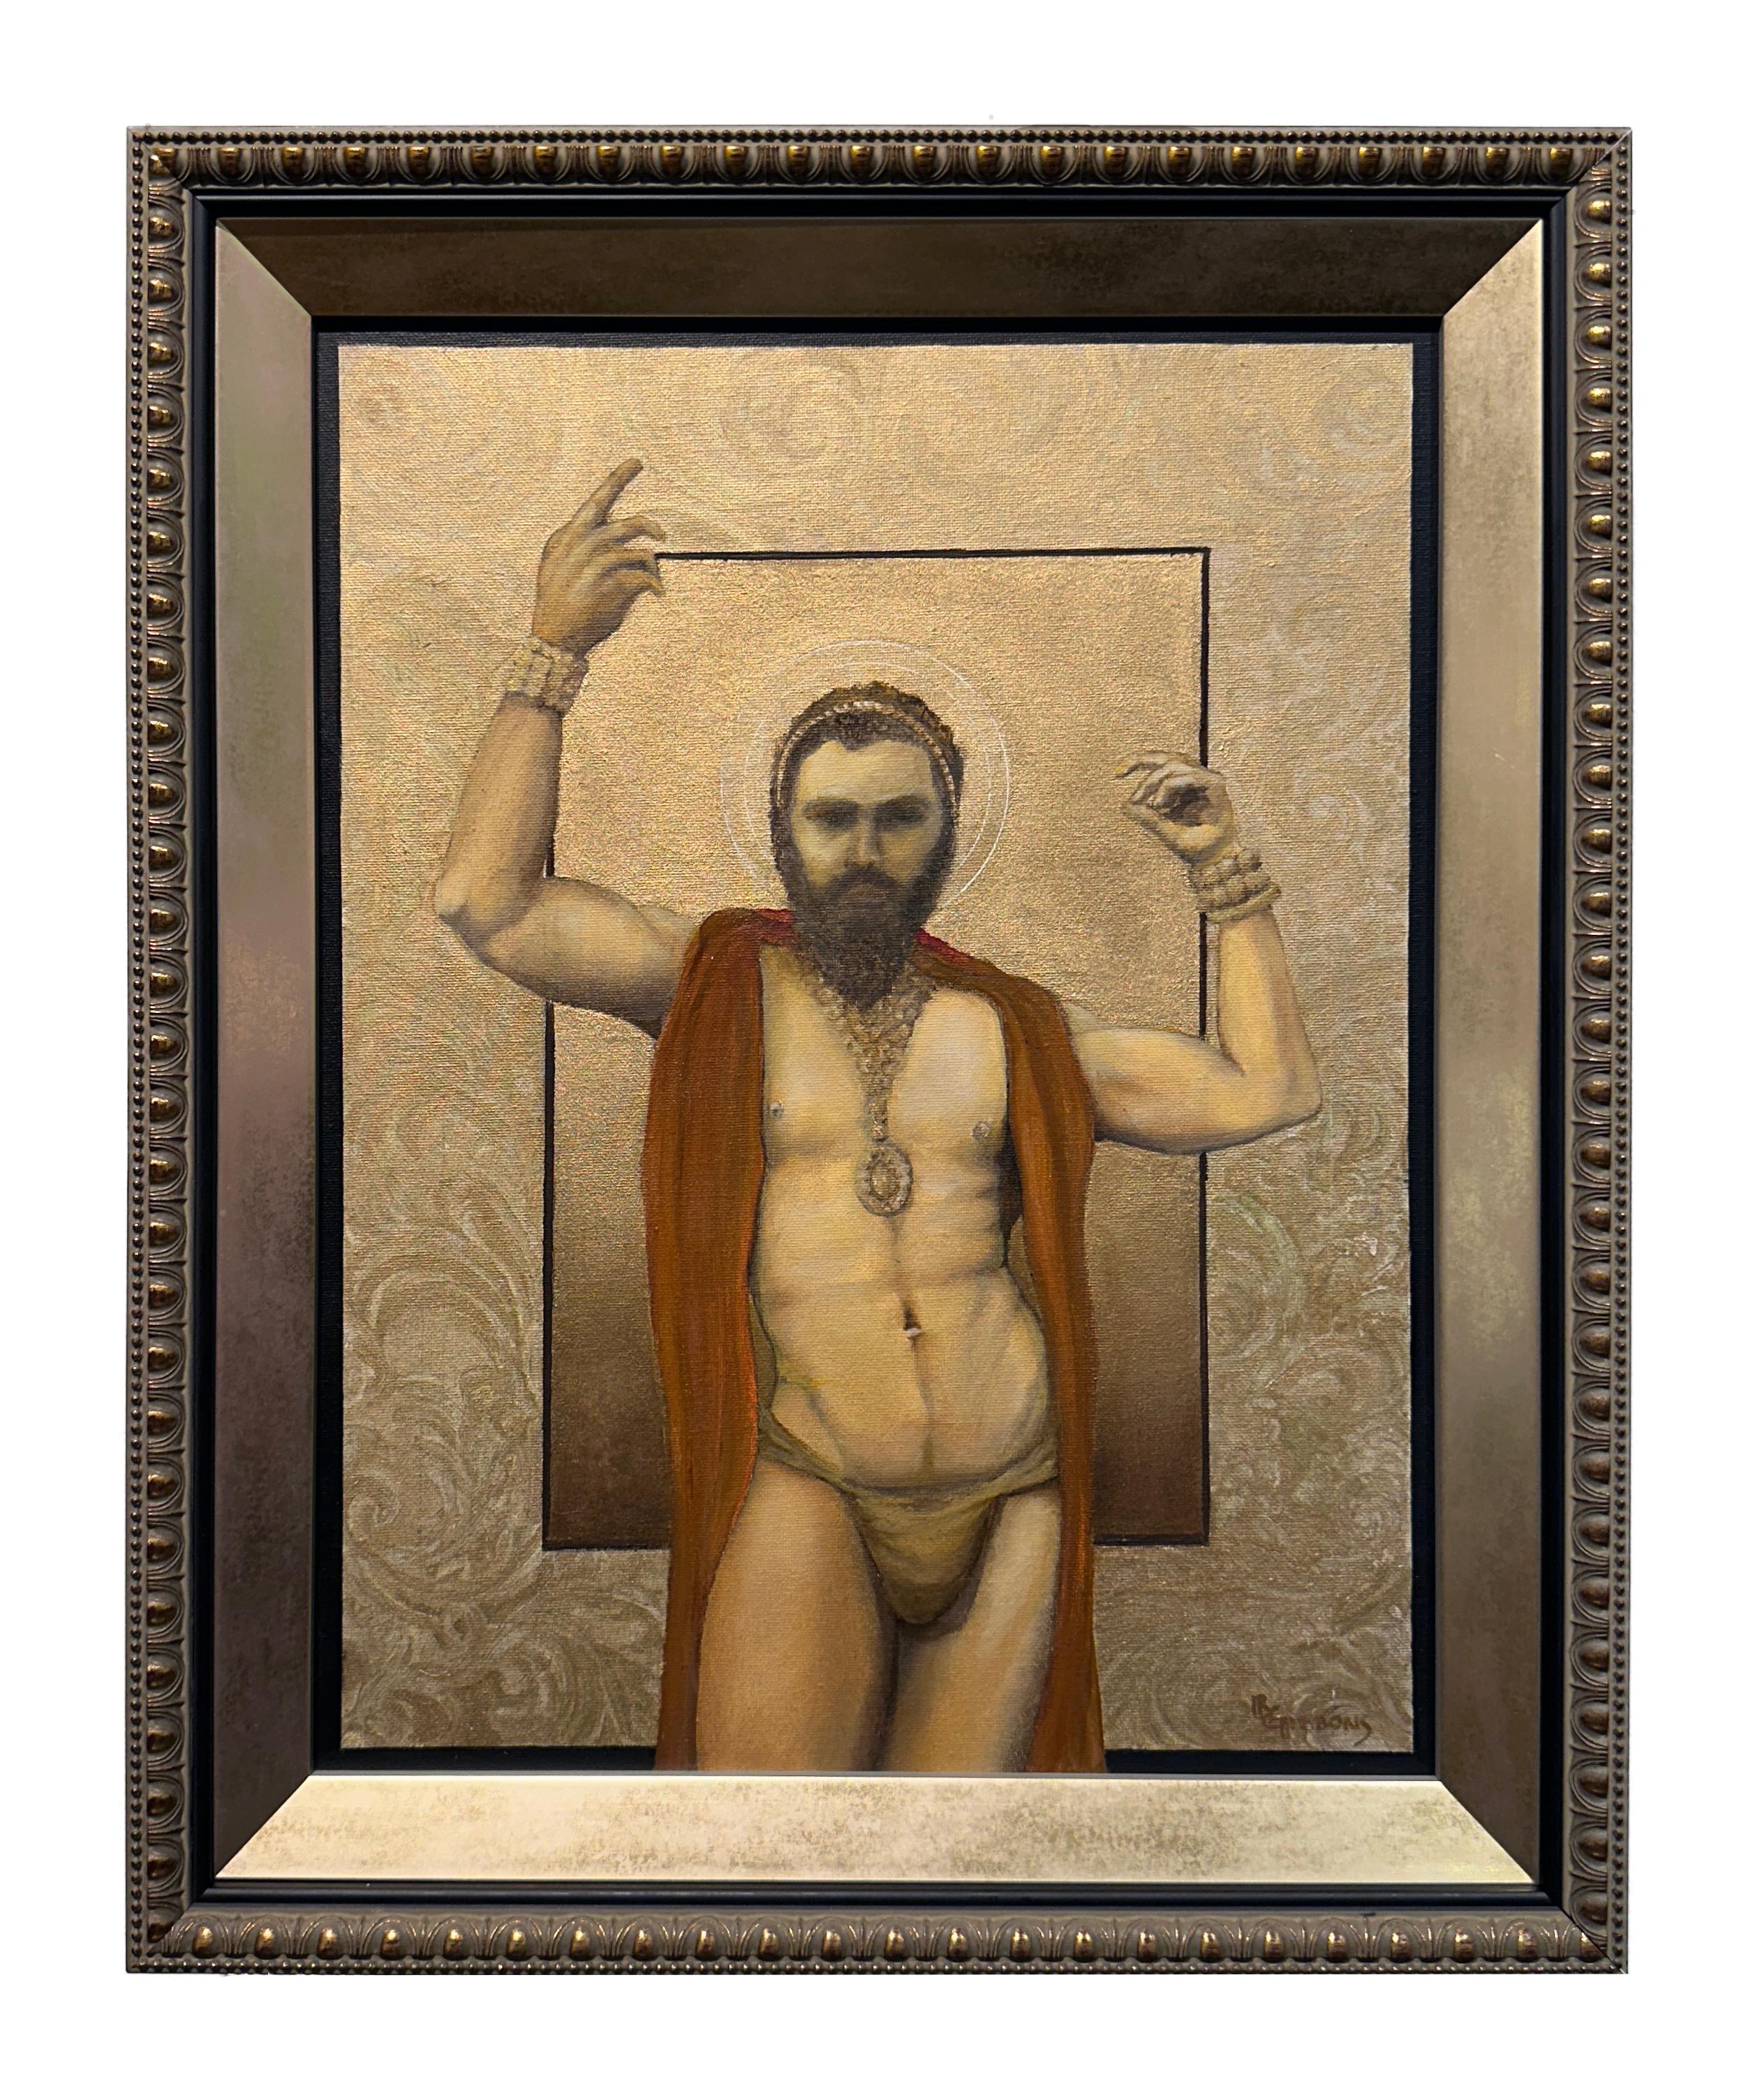 The Priest King of Knossos, Muscular Male, Original Oil on Canvas